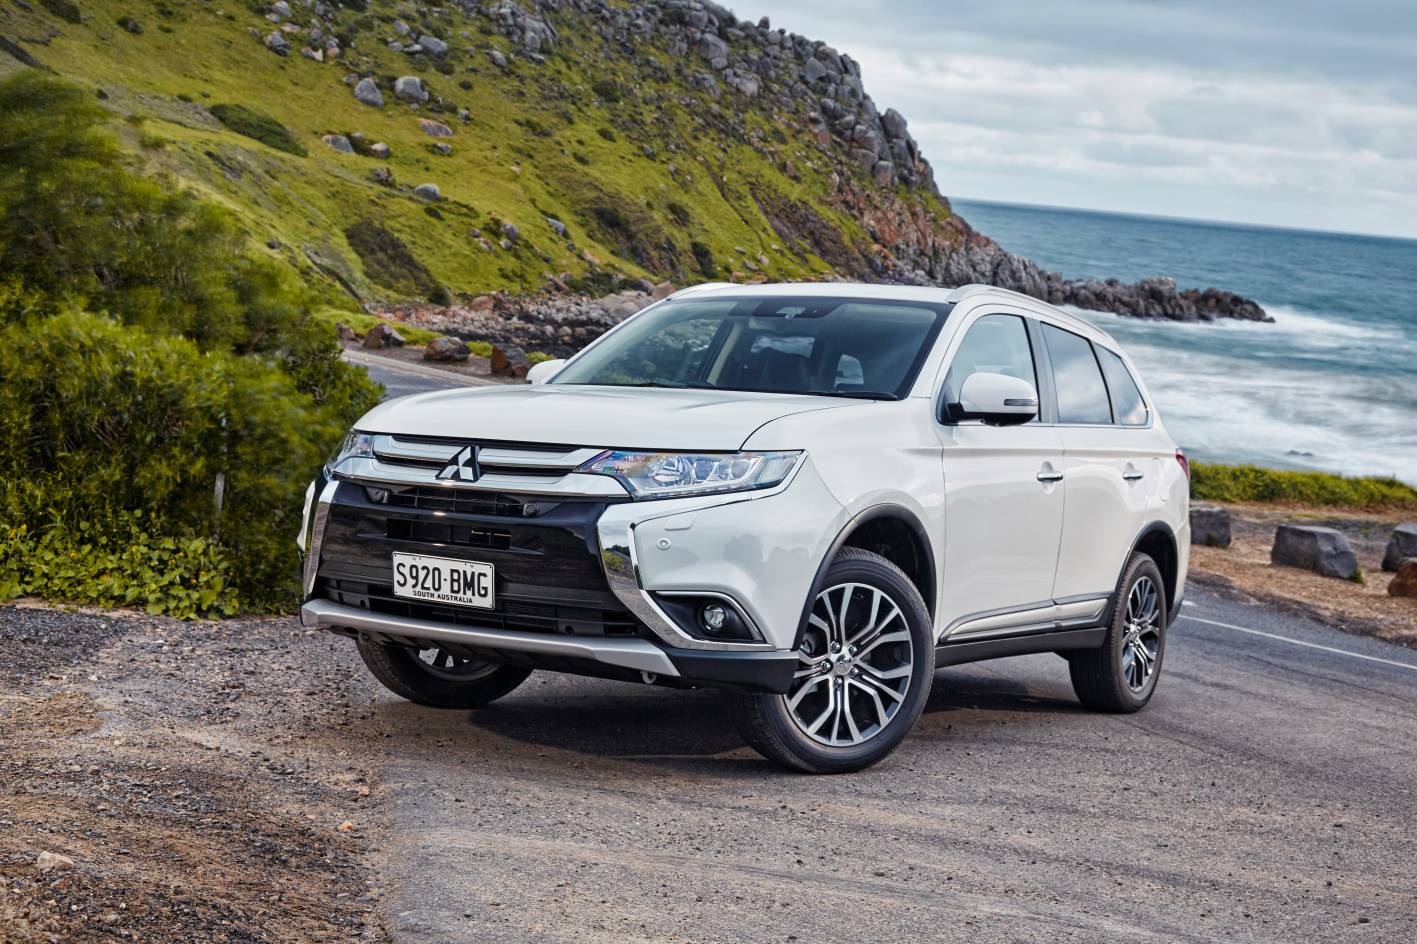 2017 Mitsubishi Outlander loaded with advanced safety